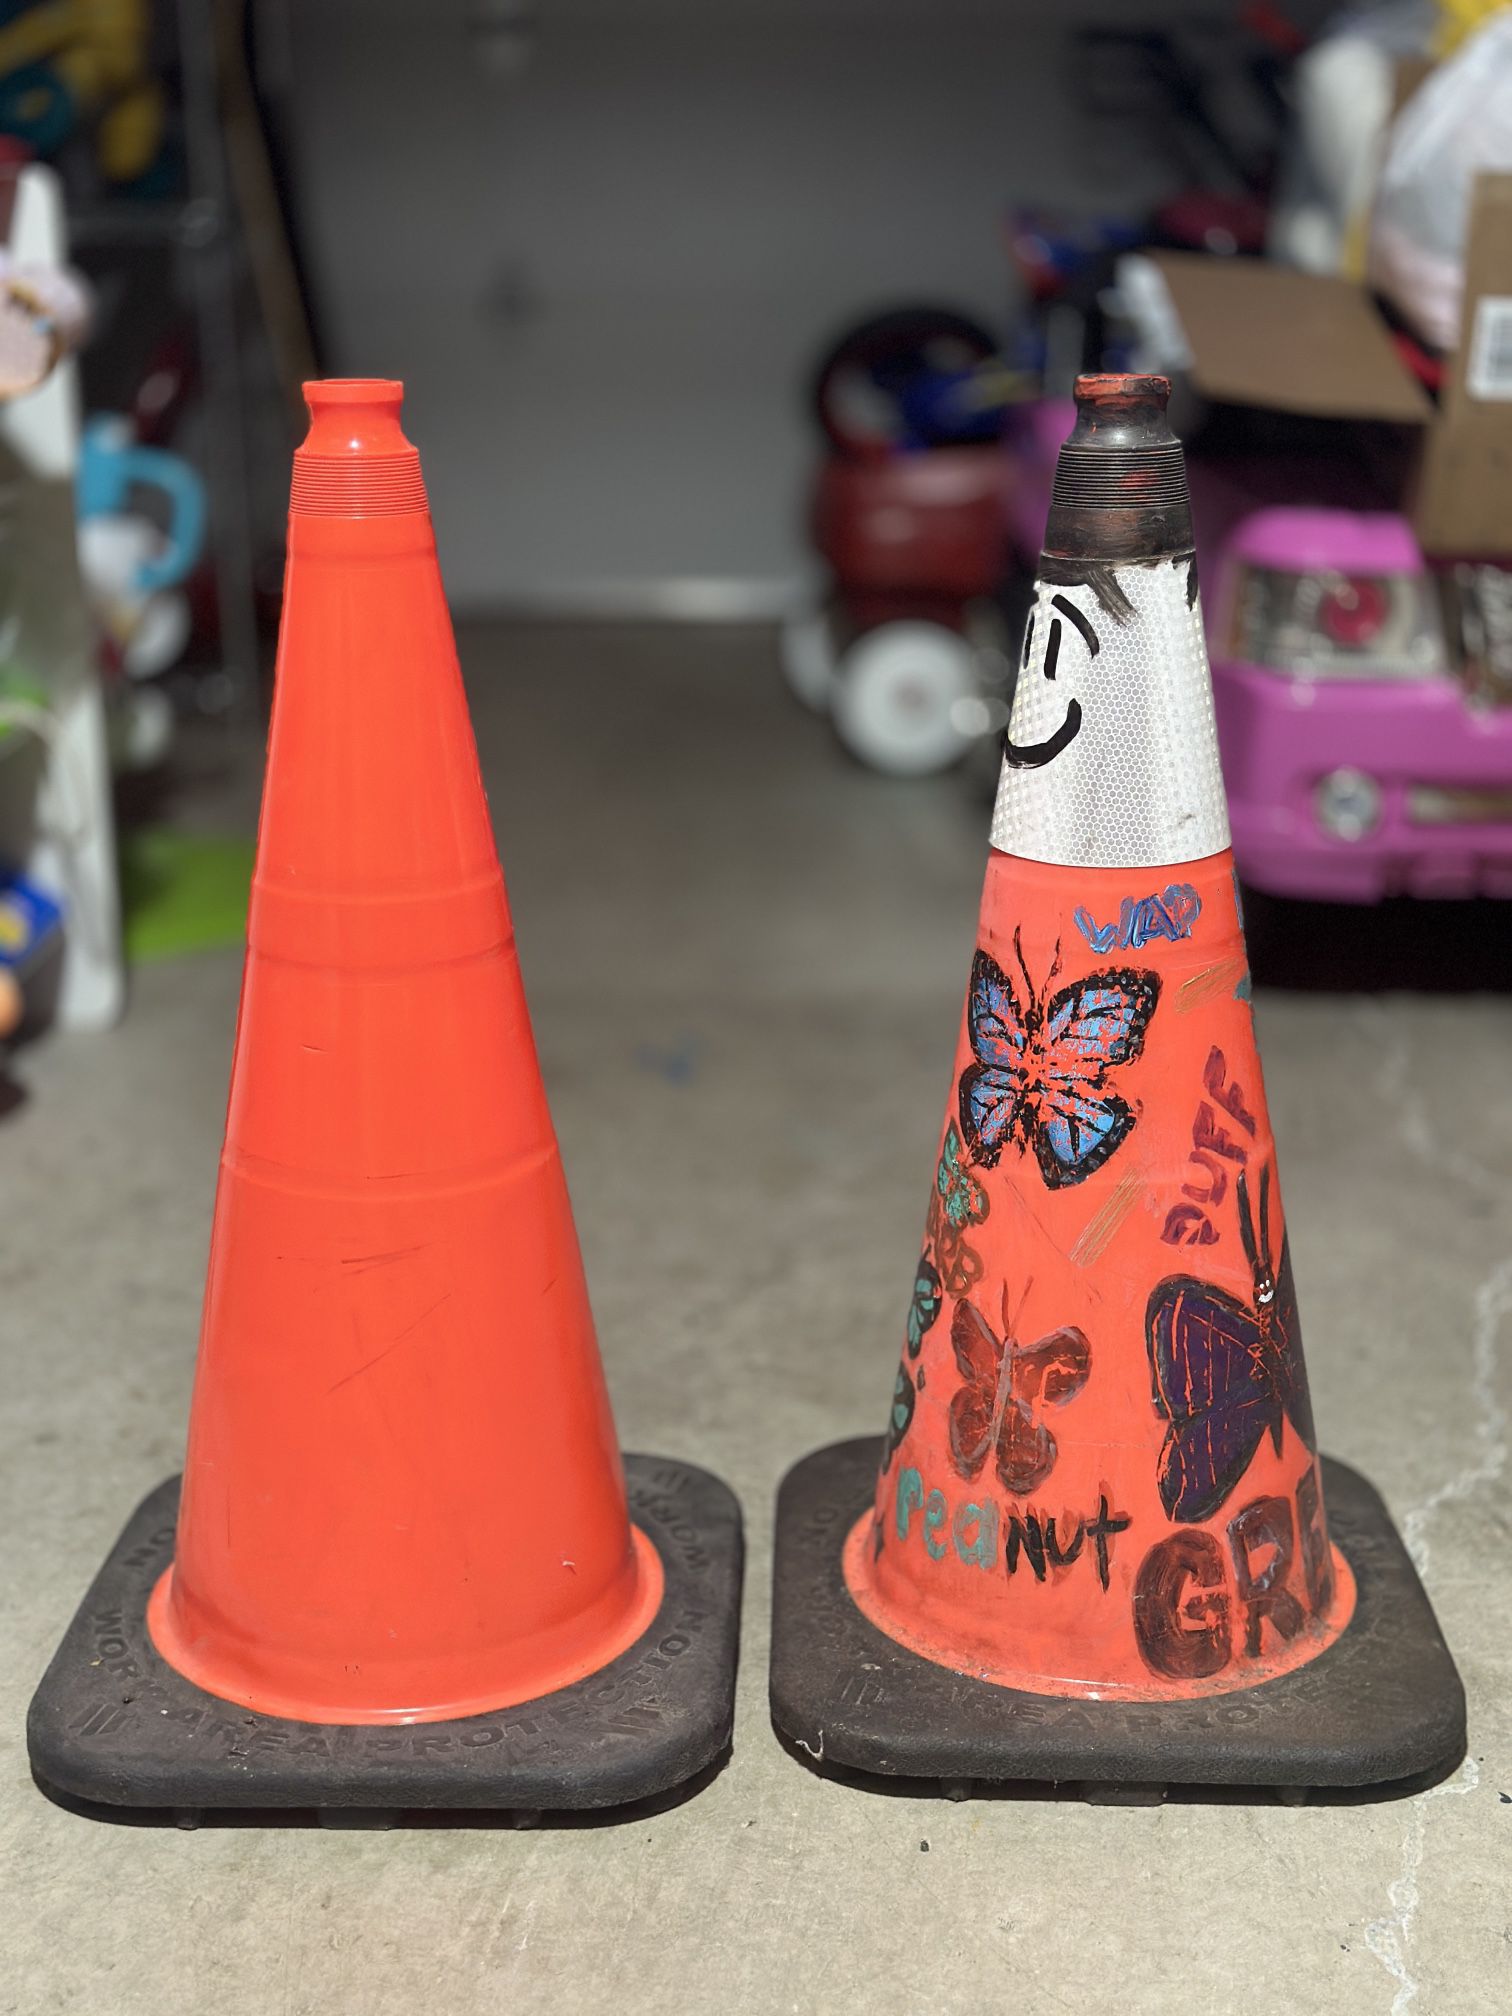 Protection work area Safety Traffic Cones 2x